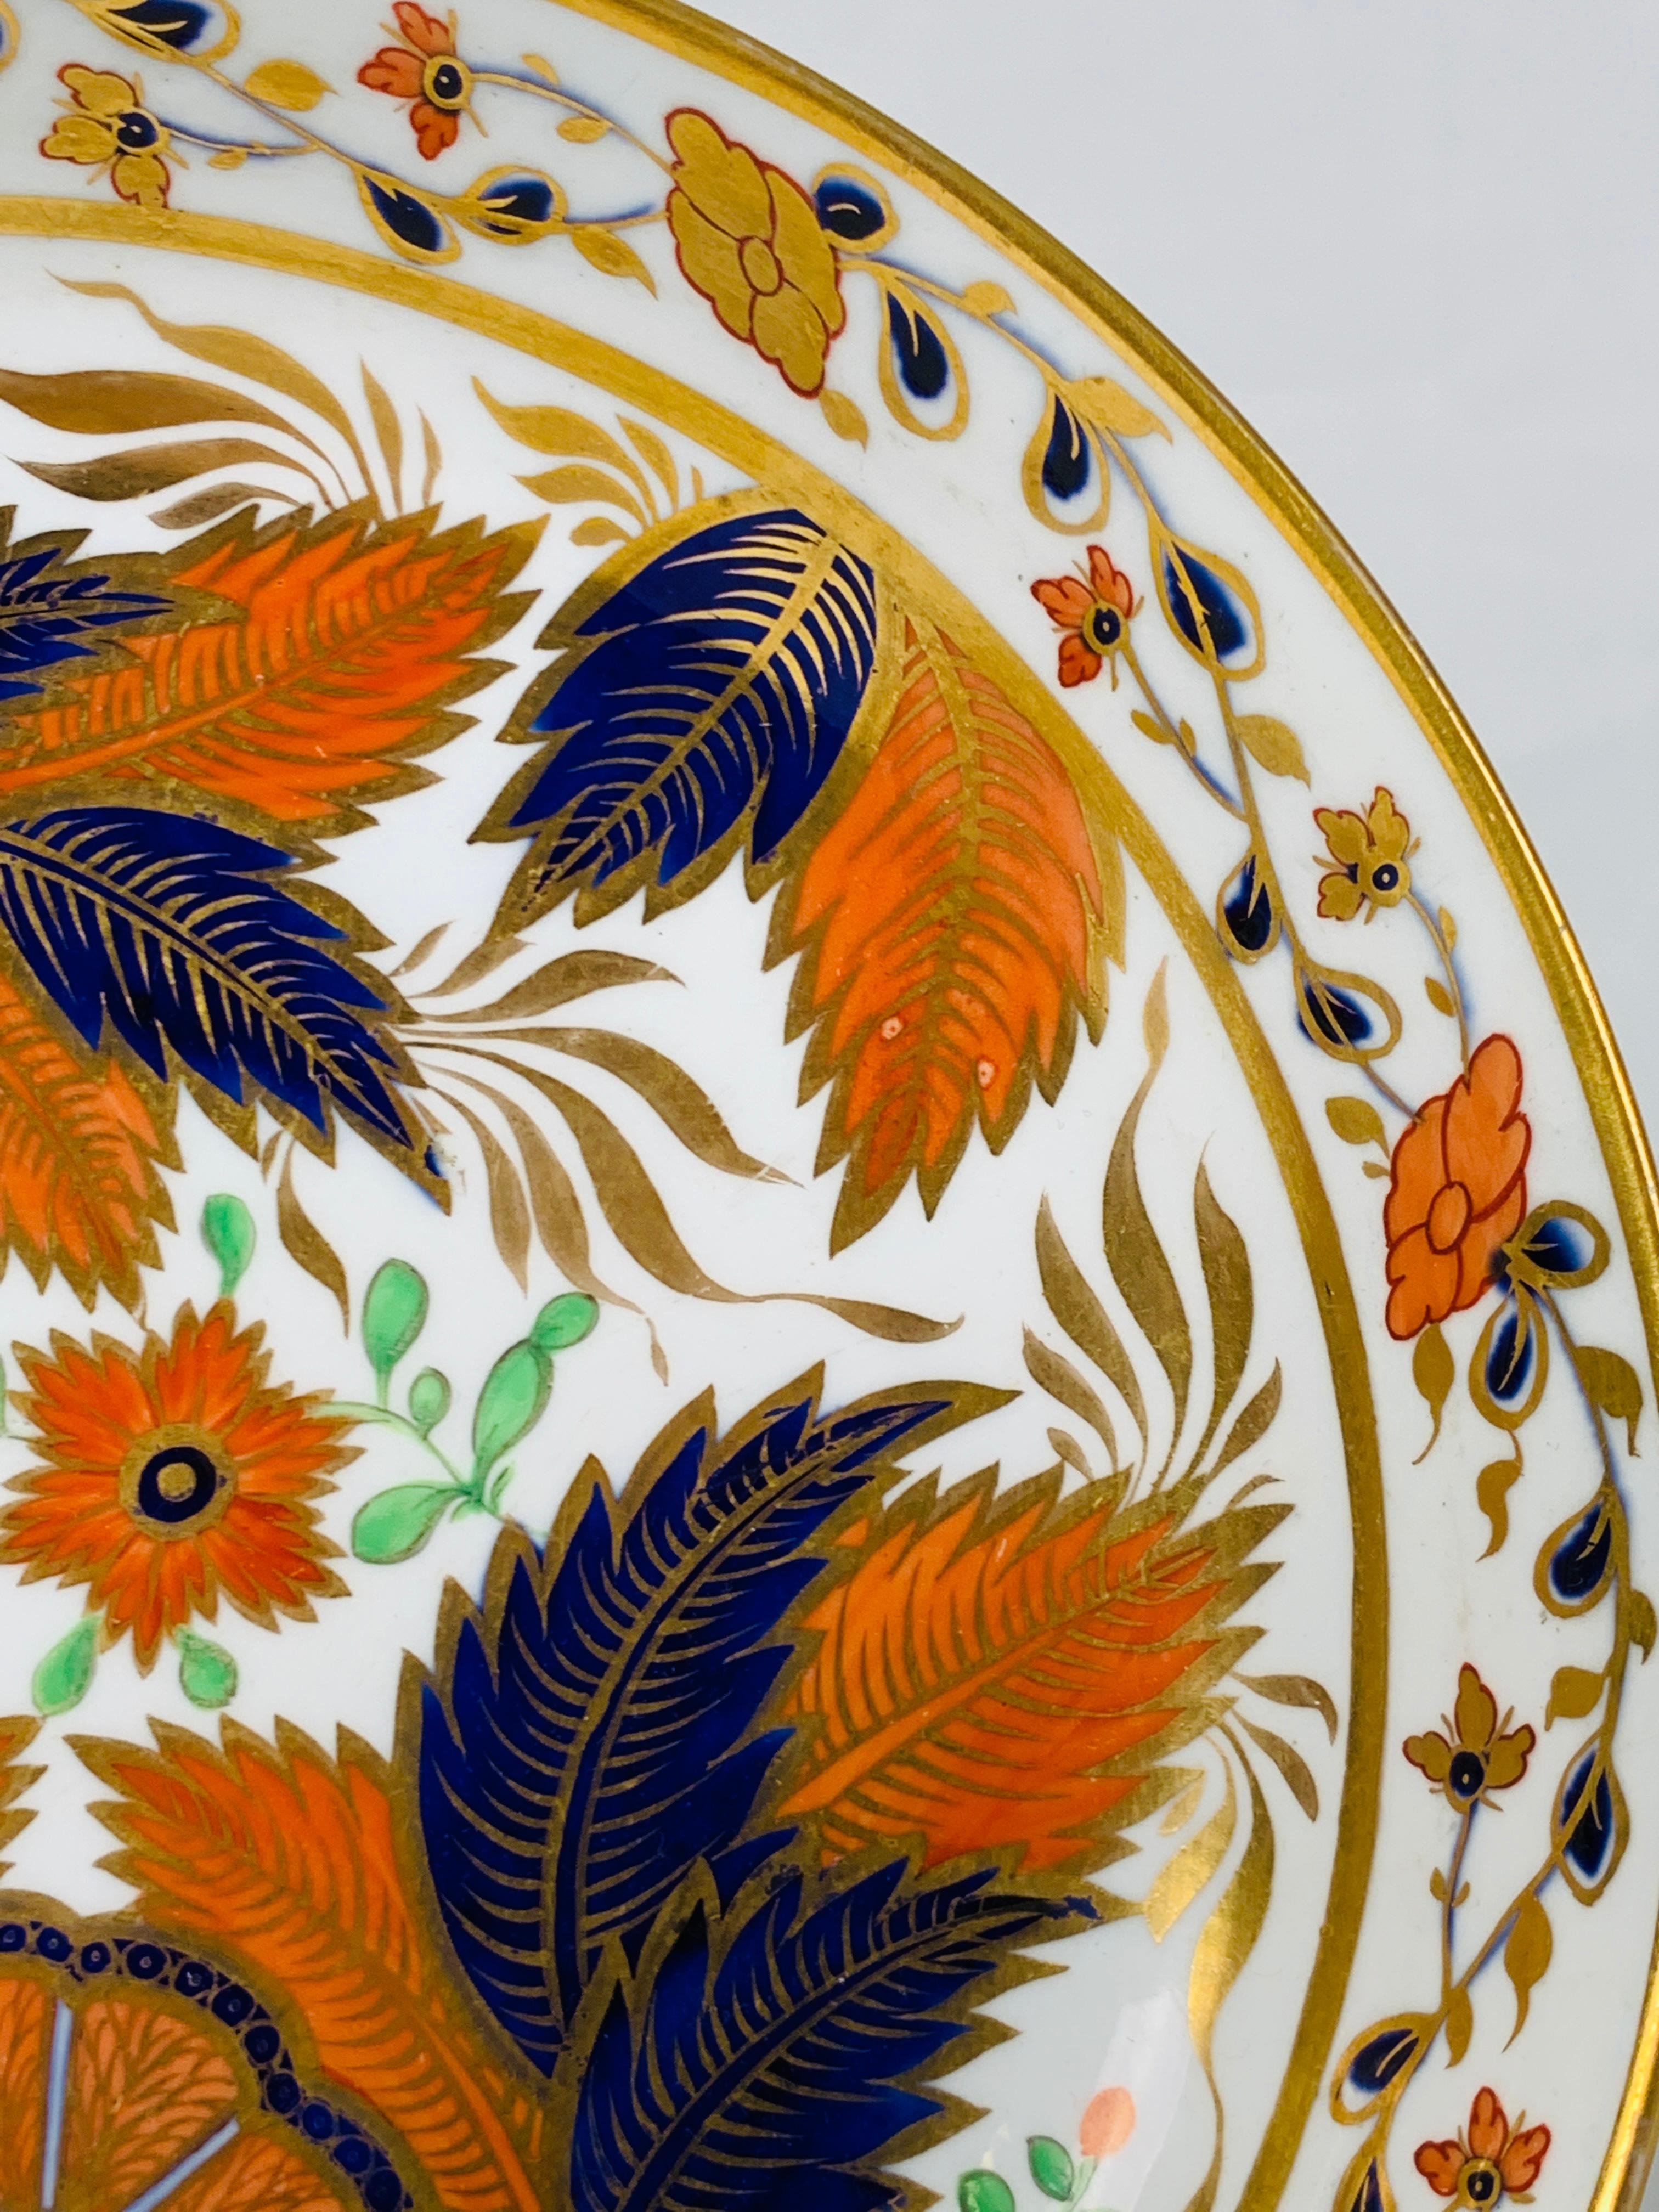 We are proud to offer this exquisite hand painted tobacco leaf pattern saucer dish. Made in England during the Regency period, circa 1820. This saucer dish closely copies an original Chinese 18th century design. Of all the 18th century porcelain